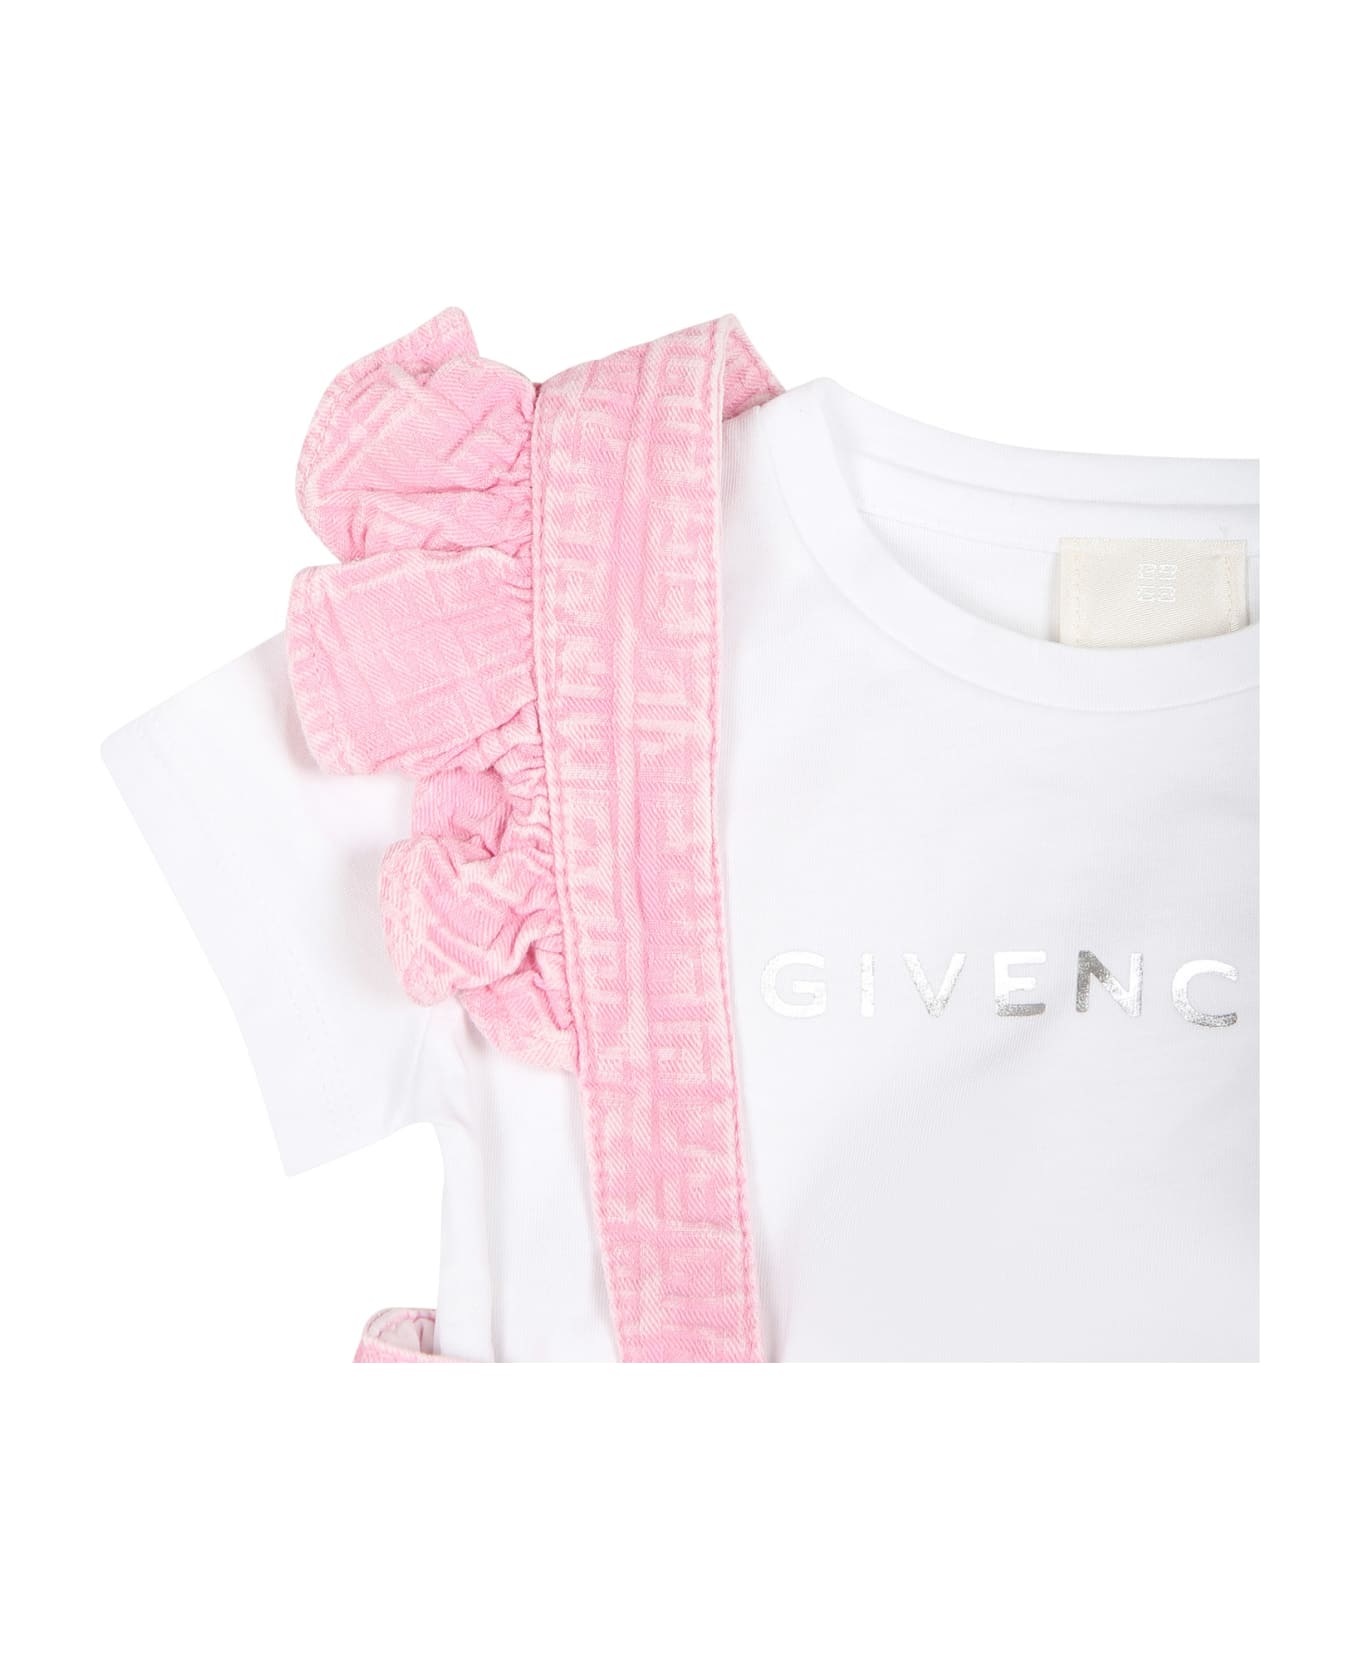 Givenchy Pink Suit For Baby Girl With Logo - Pink ウェア